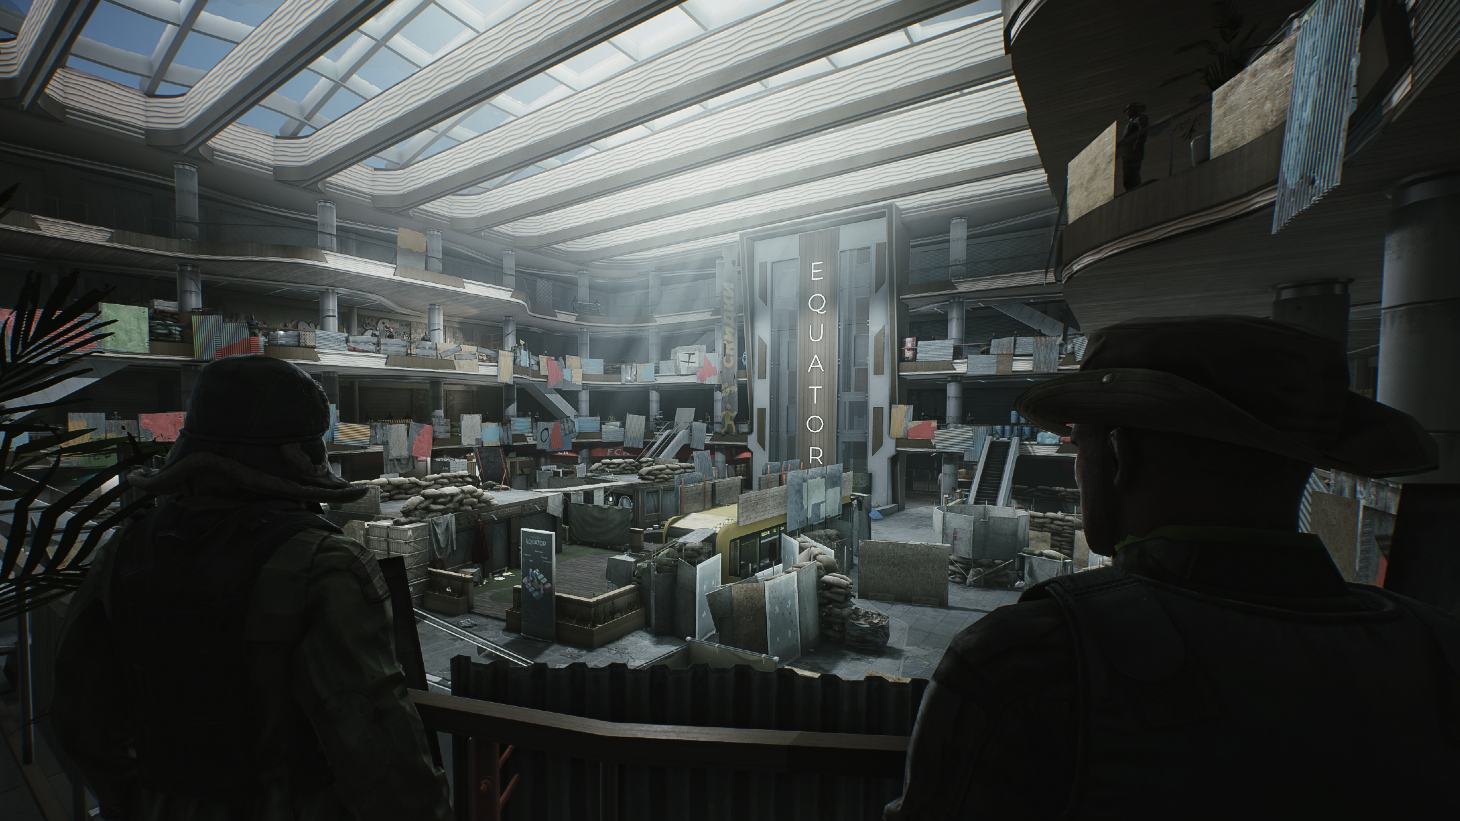 Escape From Tarkov Arena Release Date: The shopping mall can be seen